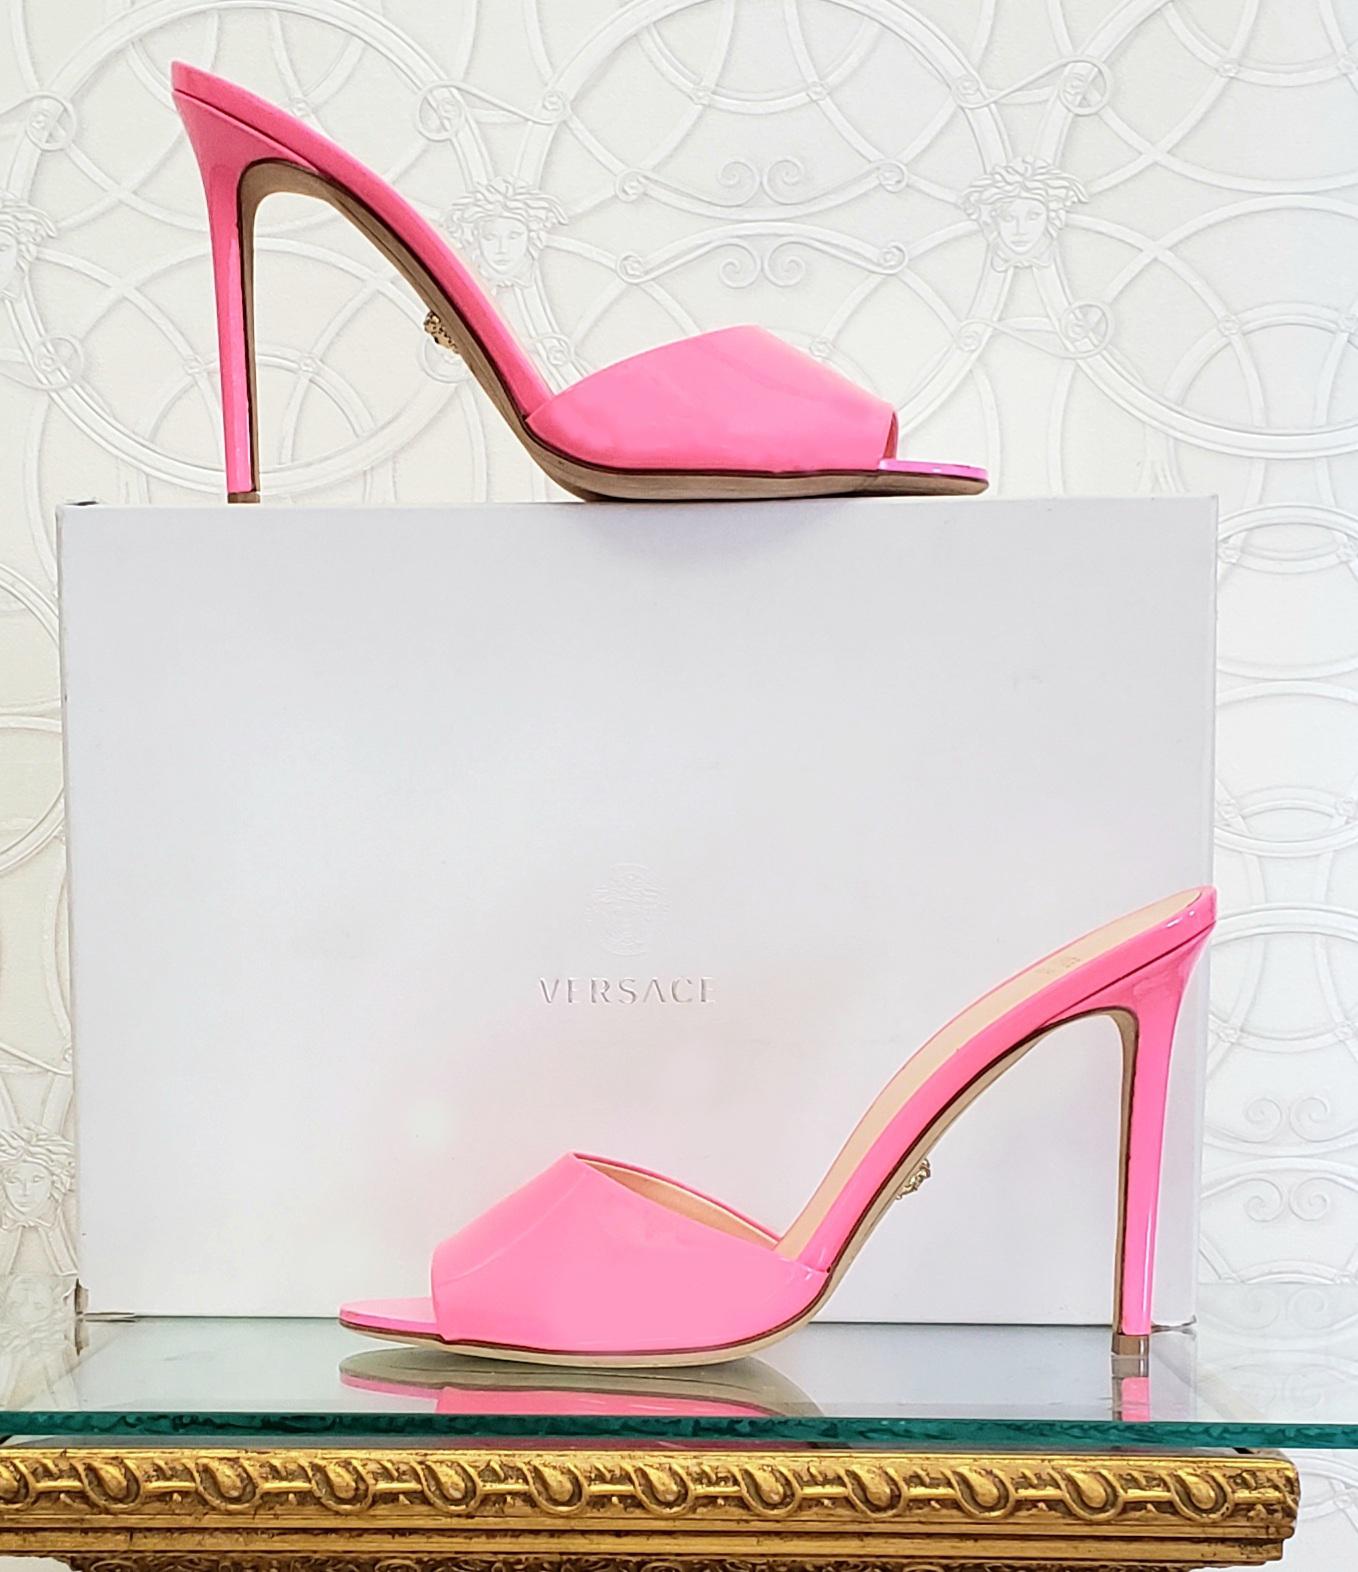 Resort 2016 New VERSACE PINK PATENT LEATHER MULE SANDALS SHOES 41 - 11 For Sale 1